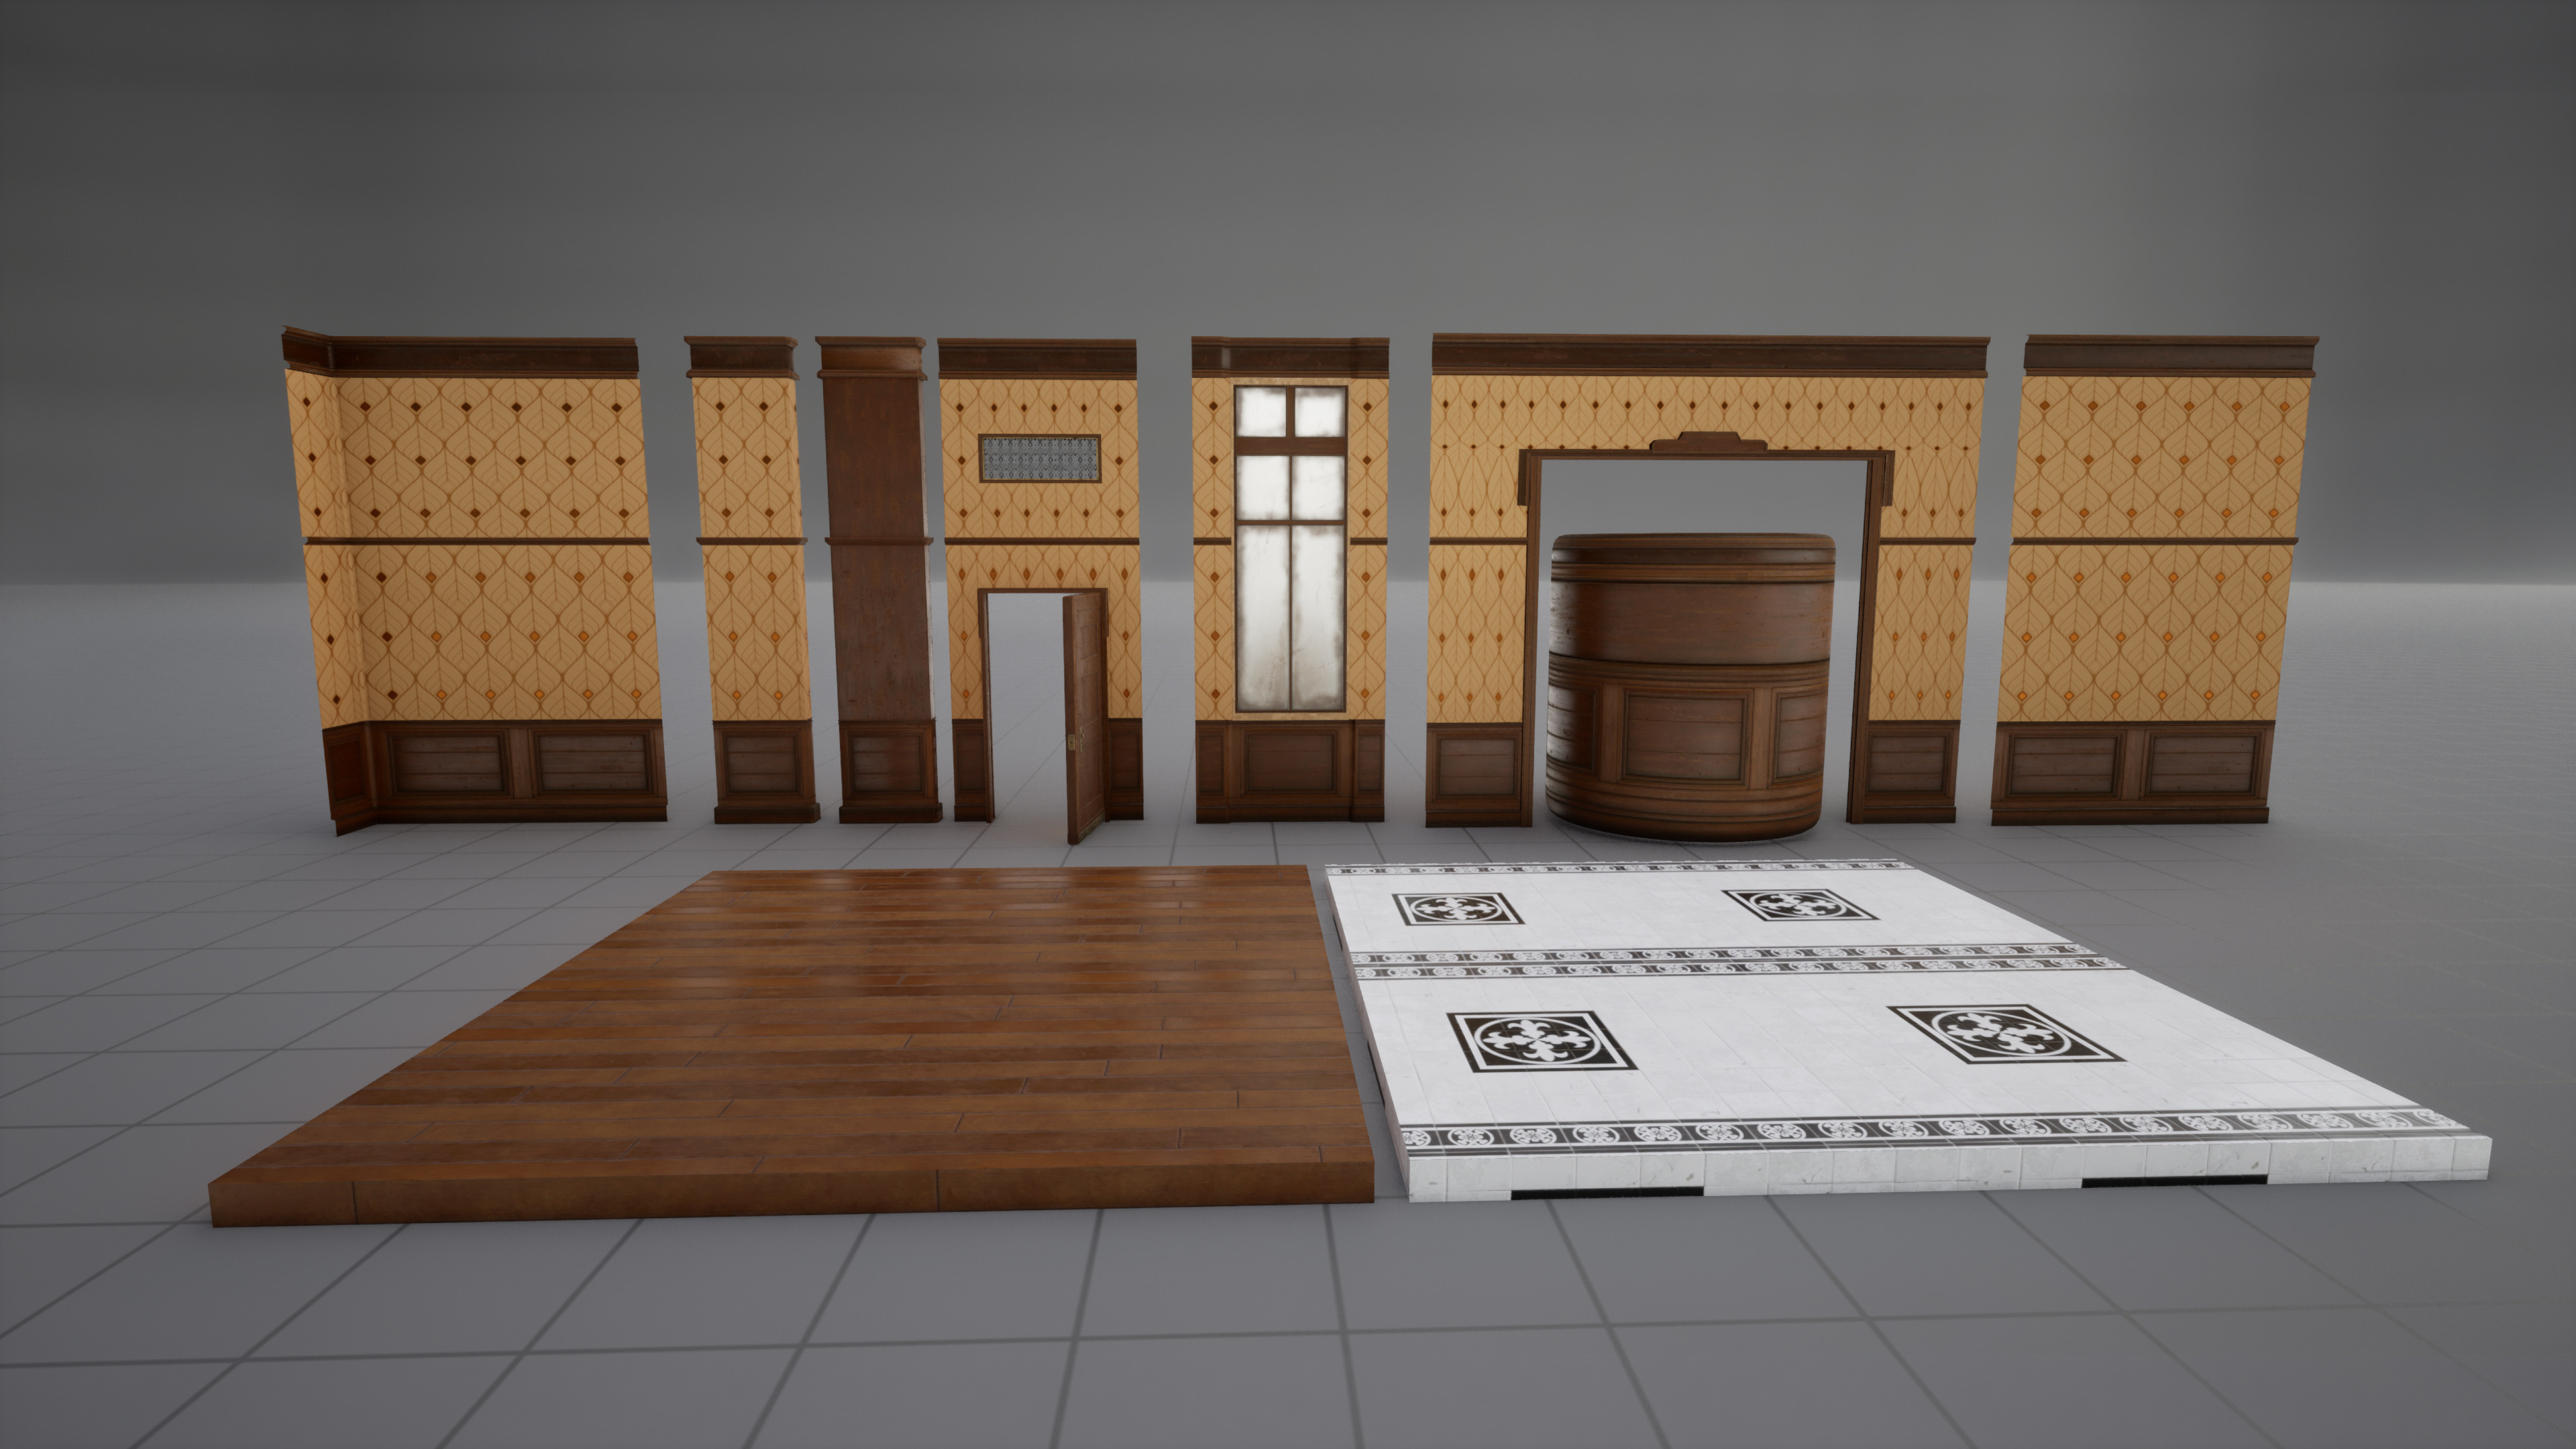 Breakdown of the modular assets and floor materials as well as a trimsheet used for the wood sections of the walls.